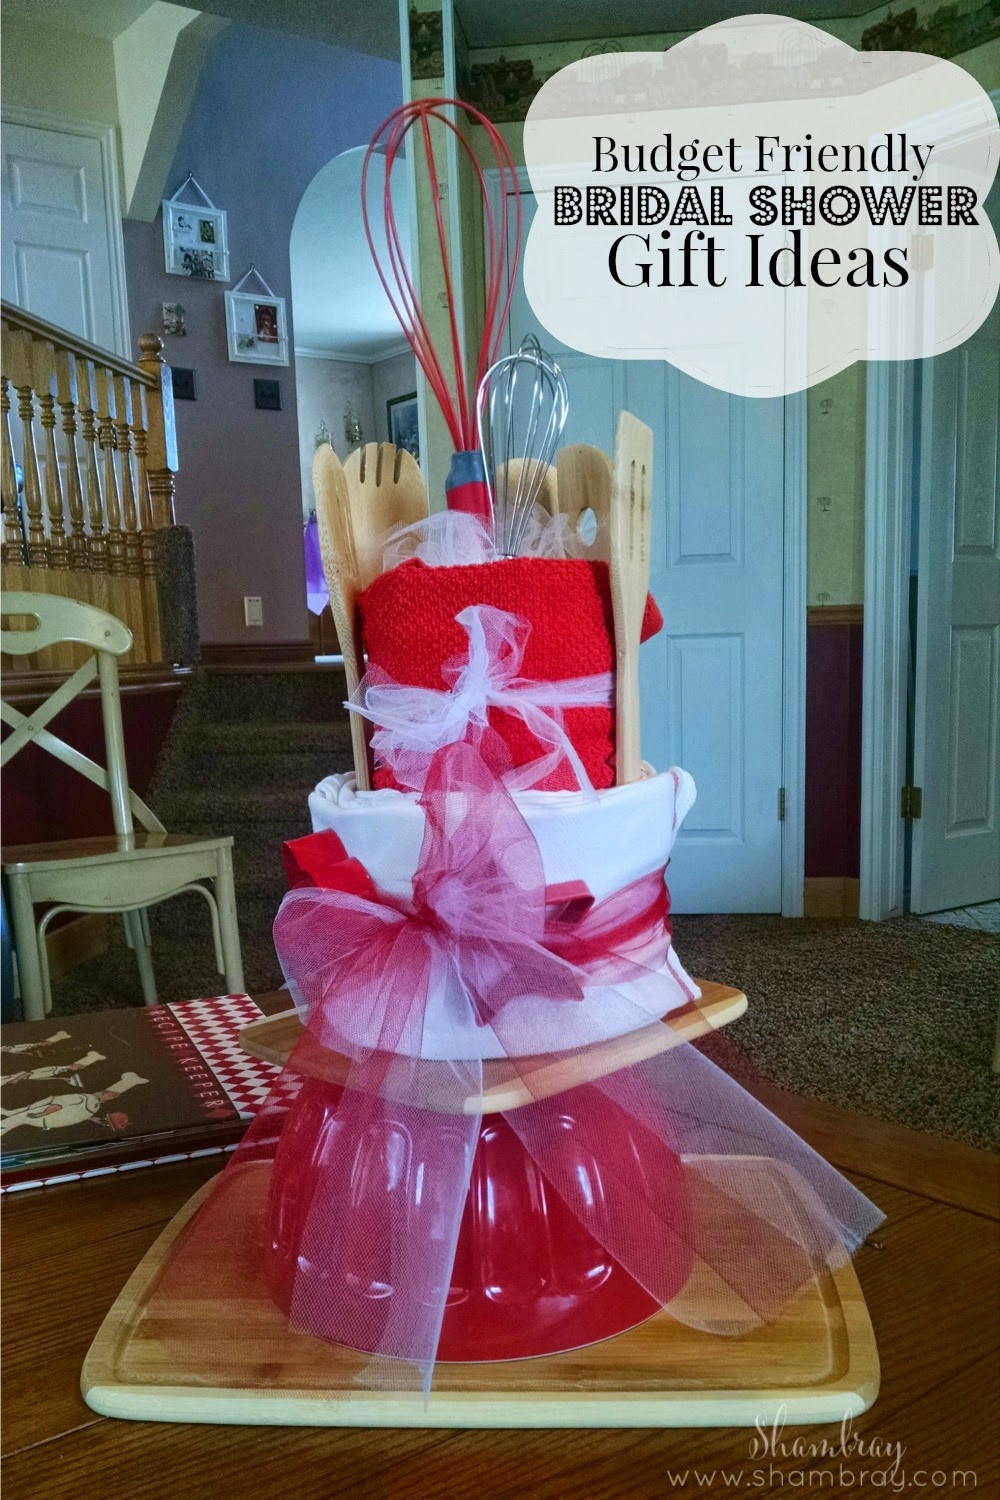 Best ideas about Wedding Shower Gift Ideas
. Save or Pin Shambray Bud Friendly Bridal Shower Gift Ideas Now.